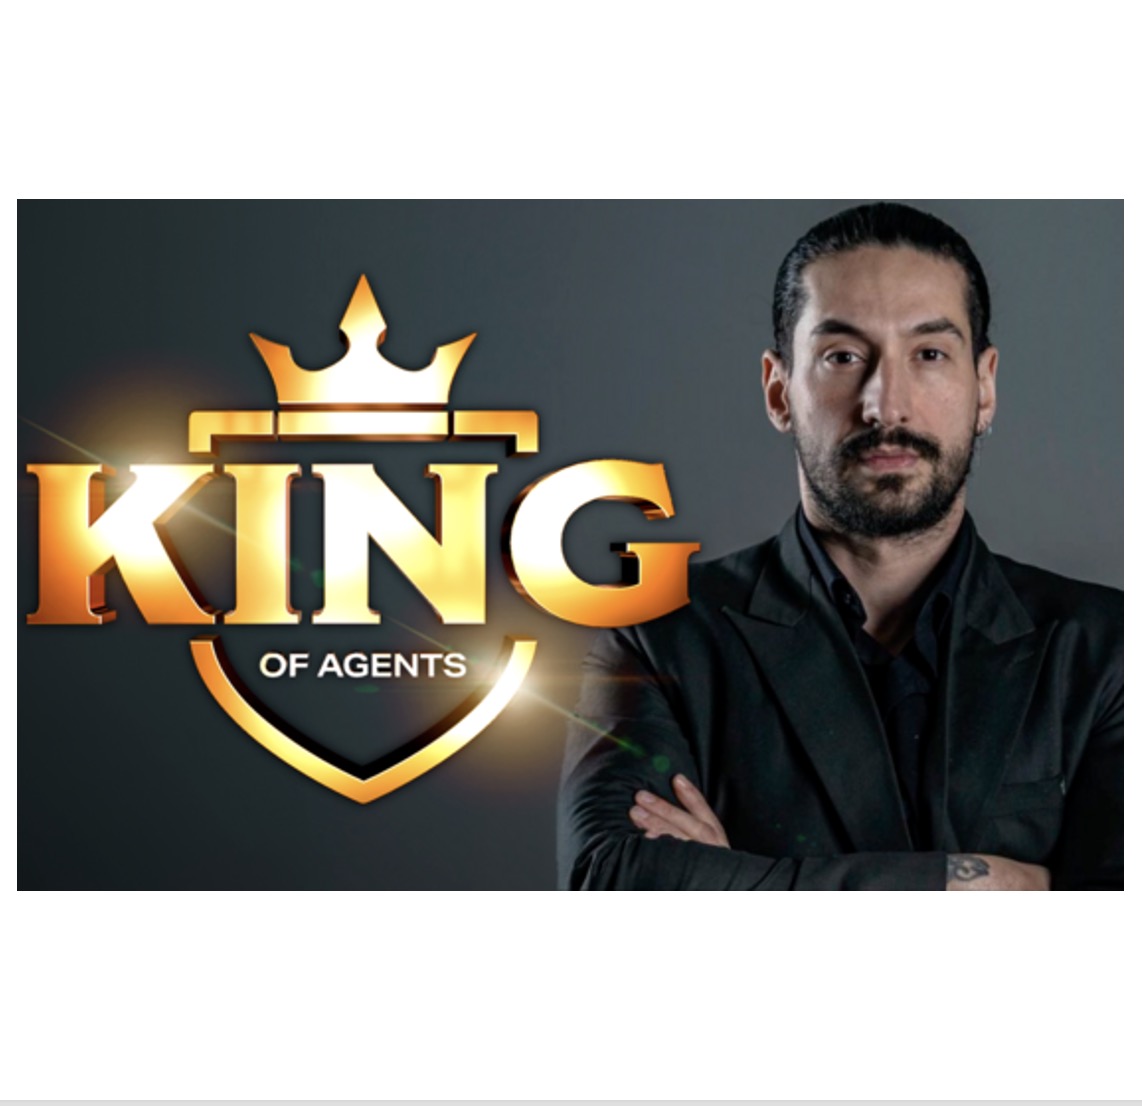 The KING of AGENTS